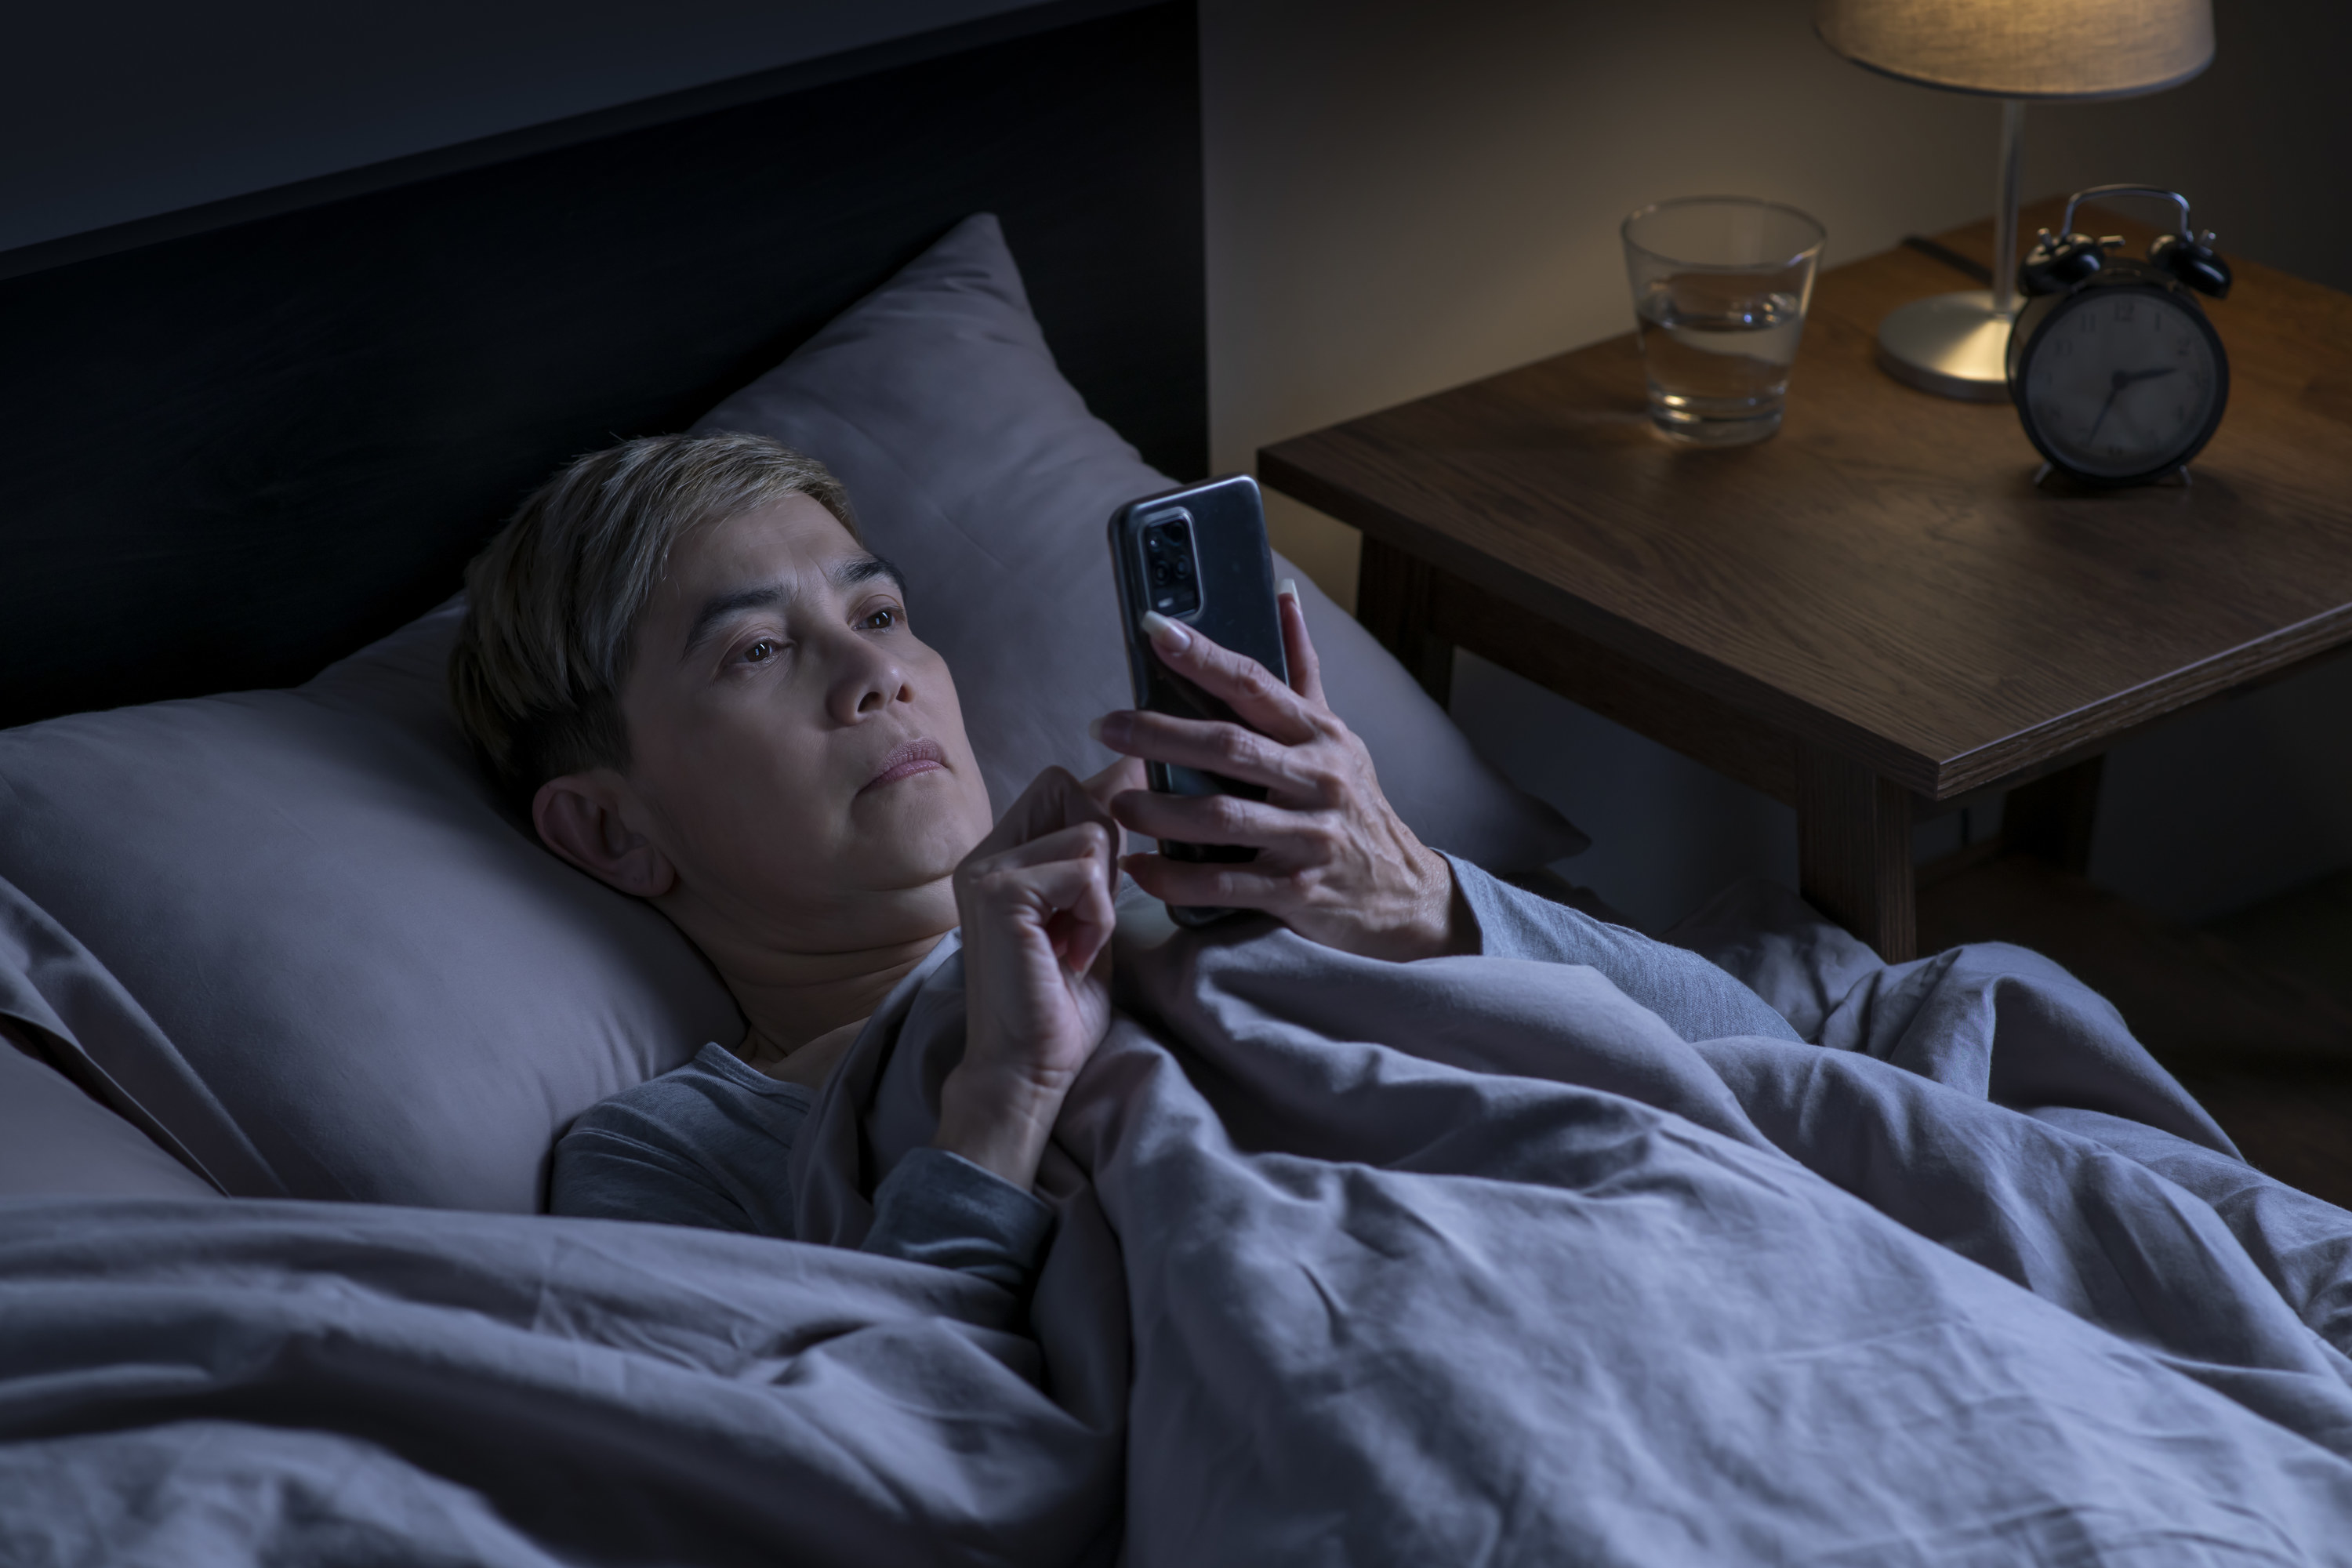 A person scrolling through their phone as they lay in bed